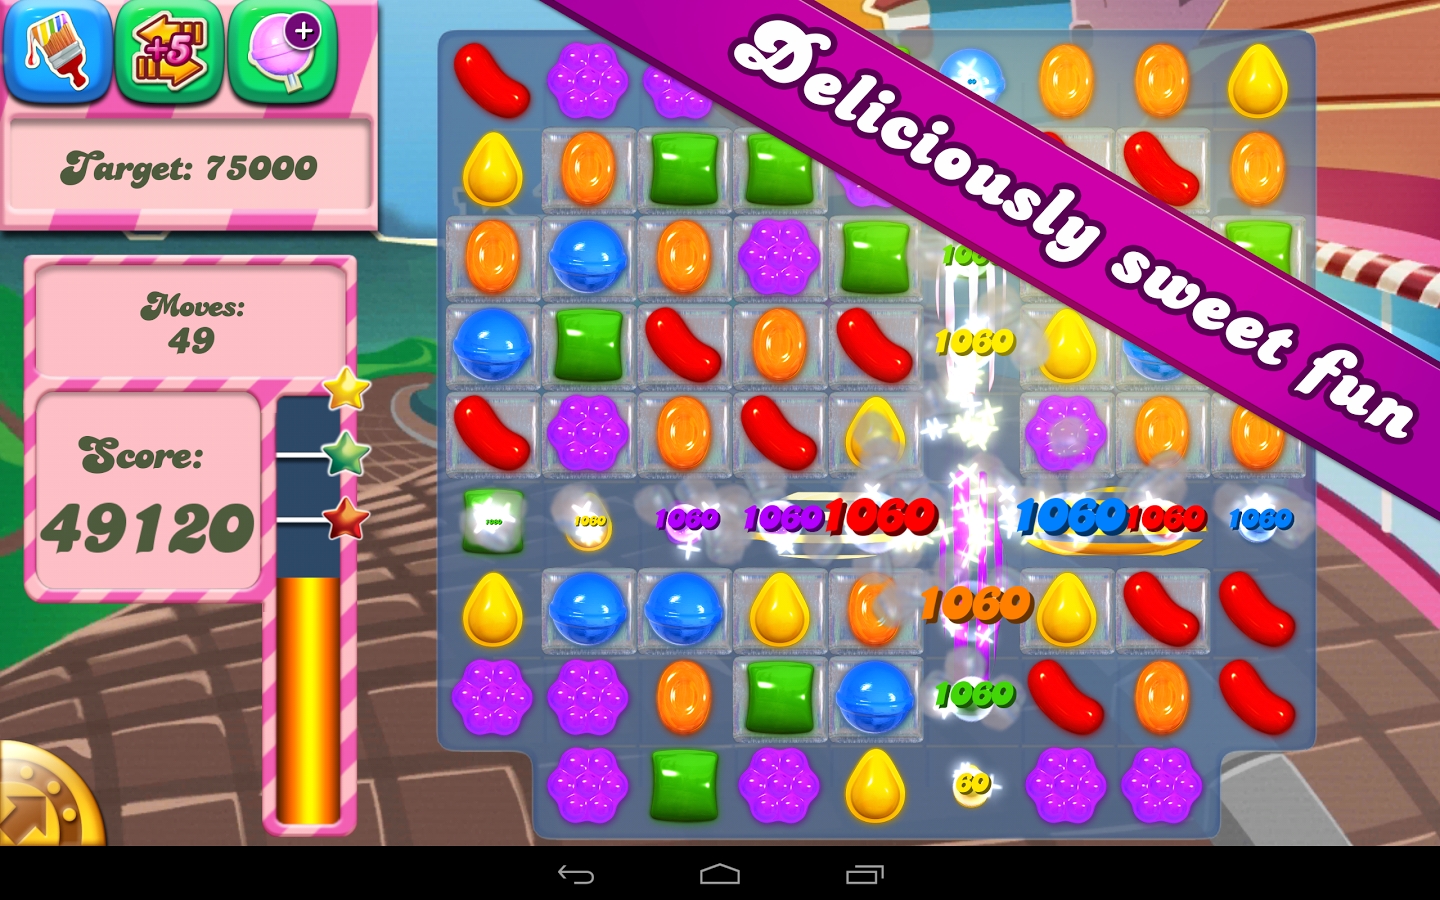 Candy-Crush-Saga-for-Android-Update-Adds-440-New-Levels-389439-2